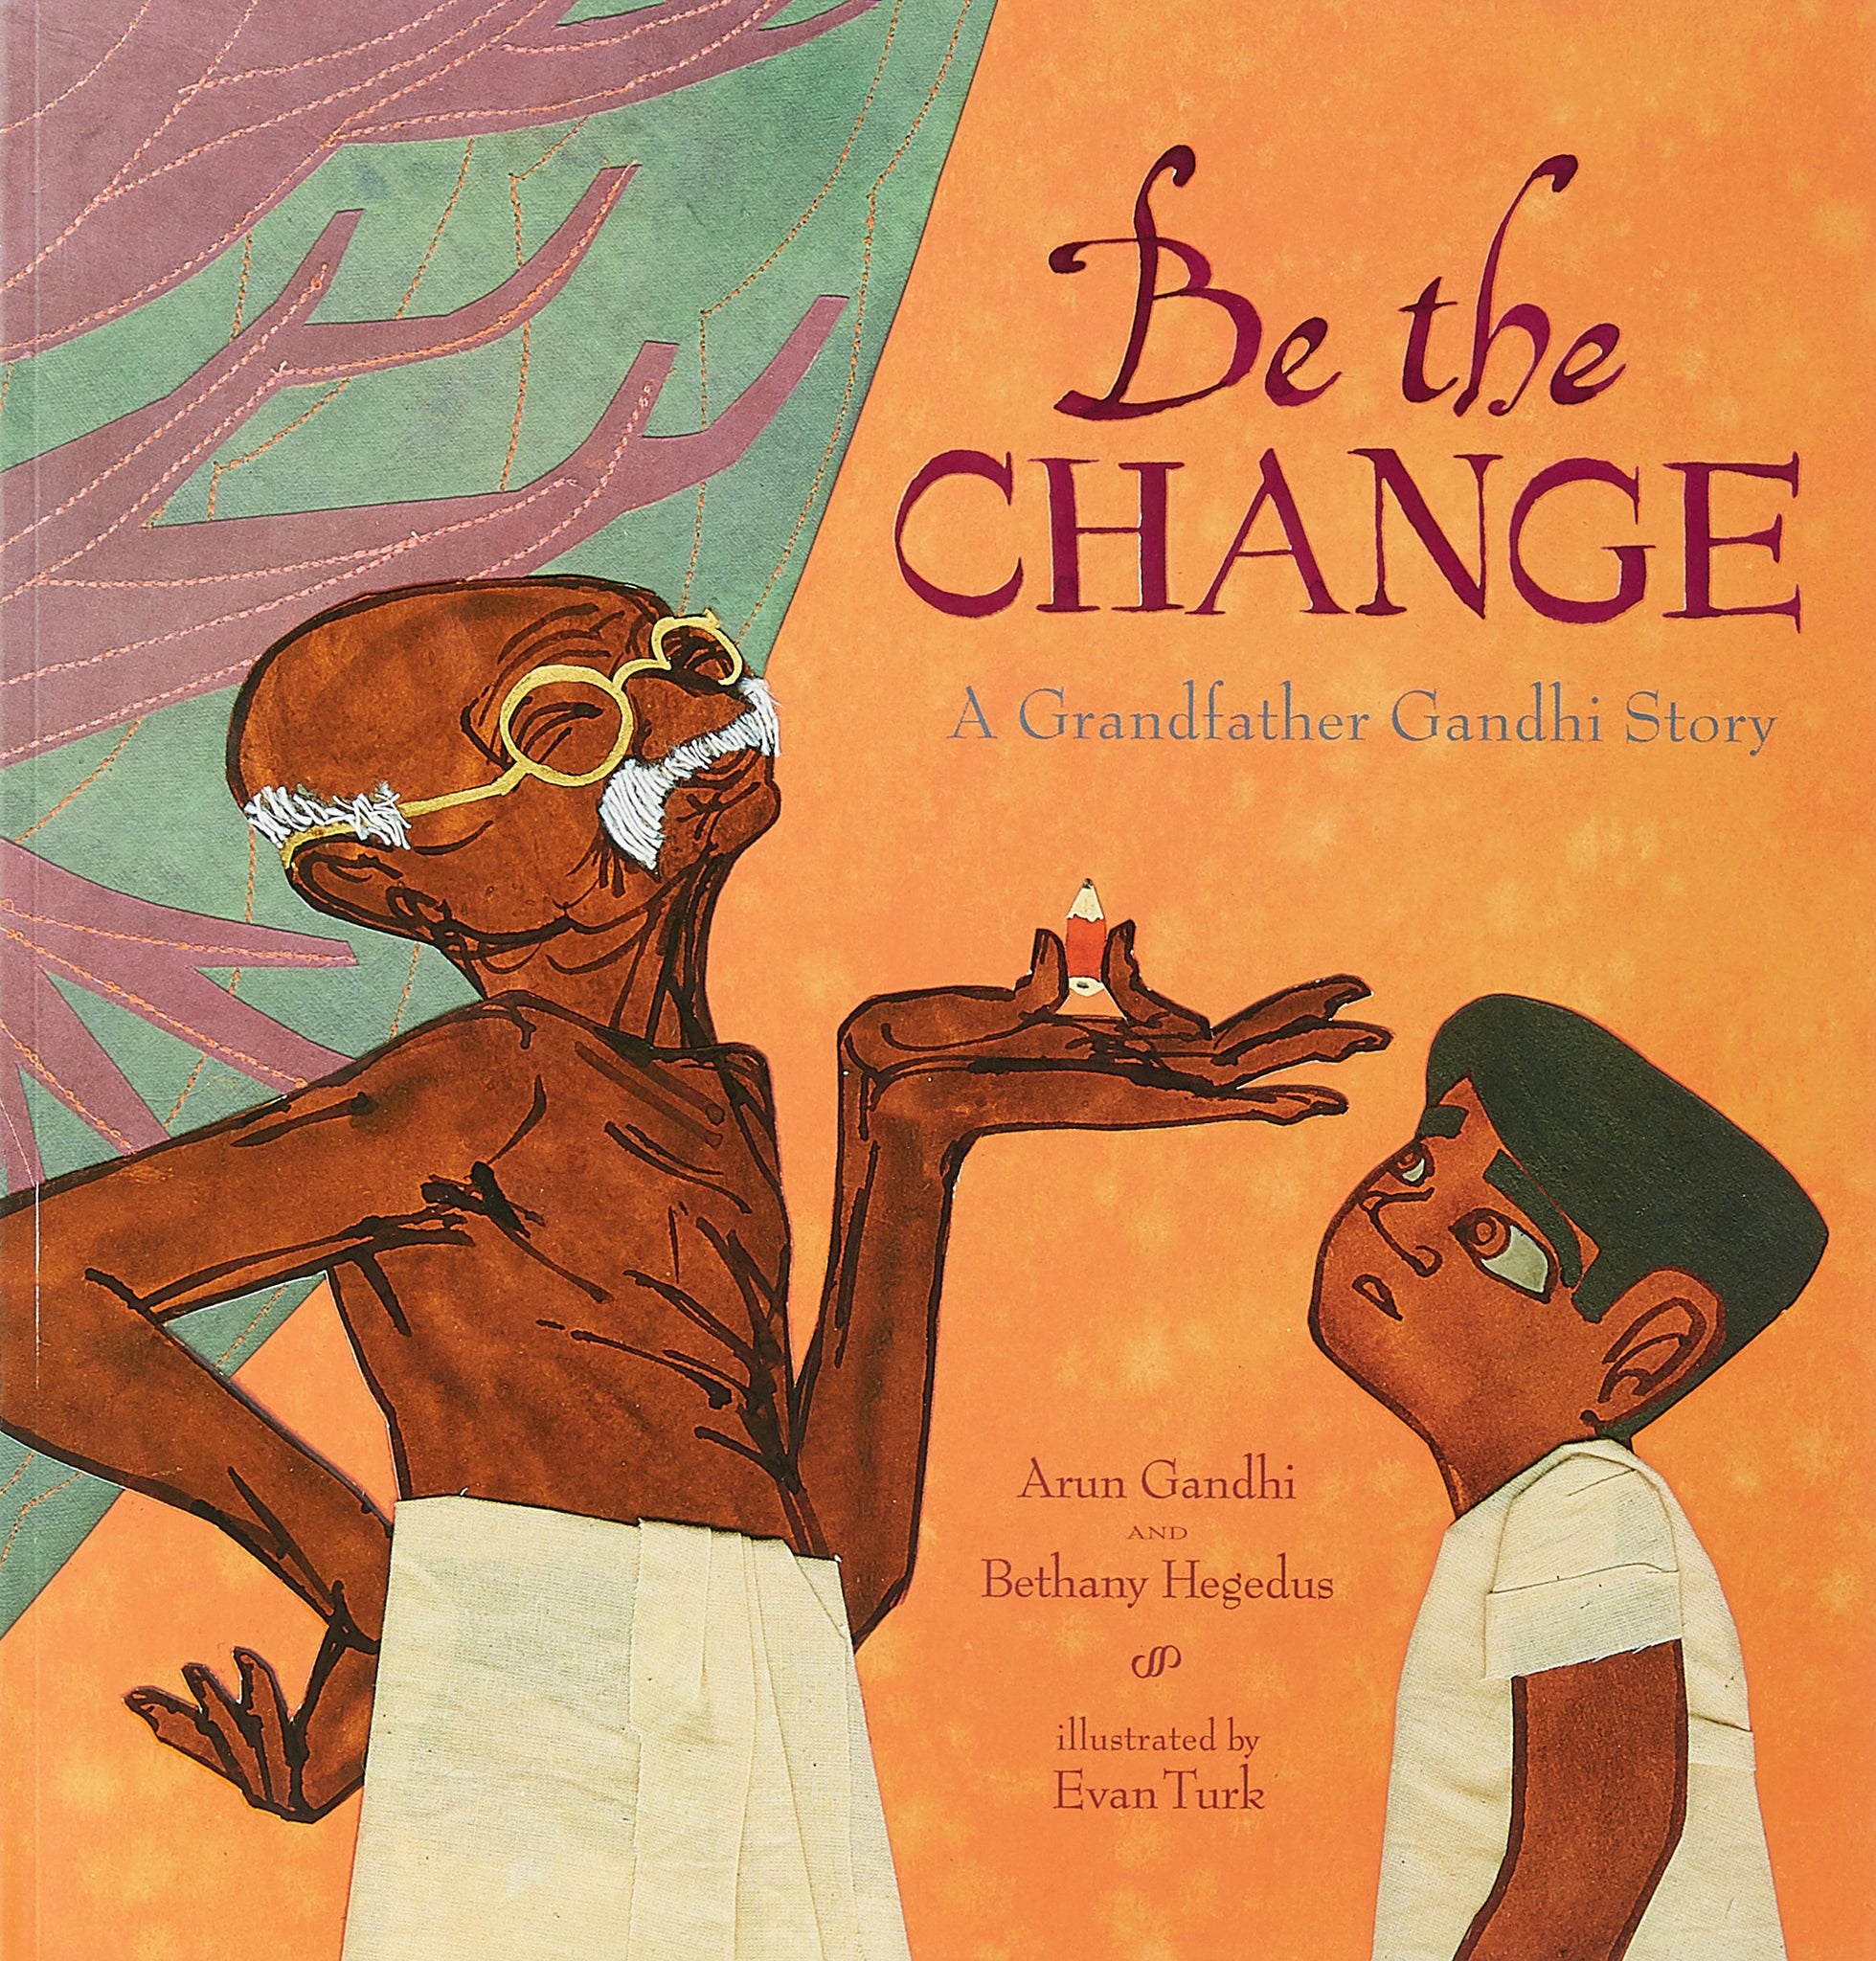 Be The Change: A Grandfather Gandhi Story